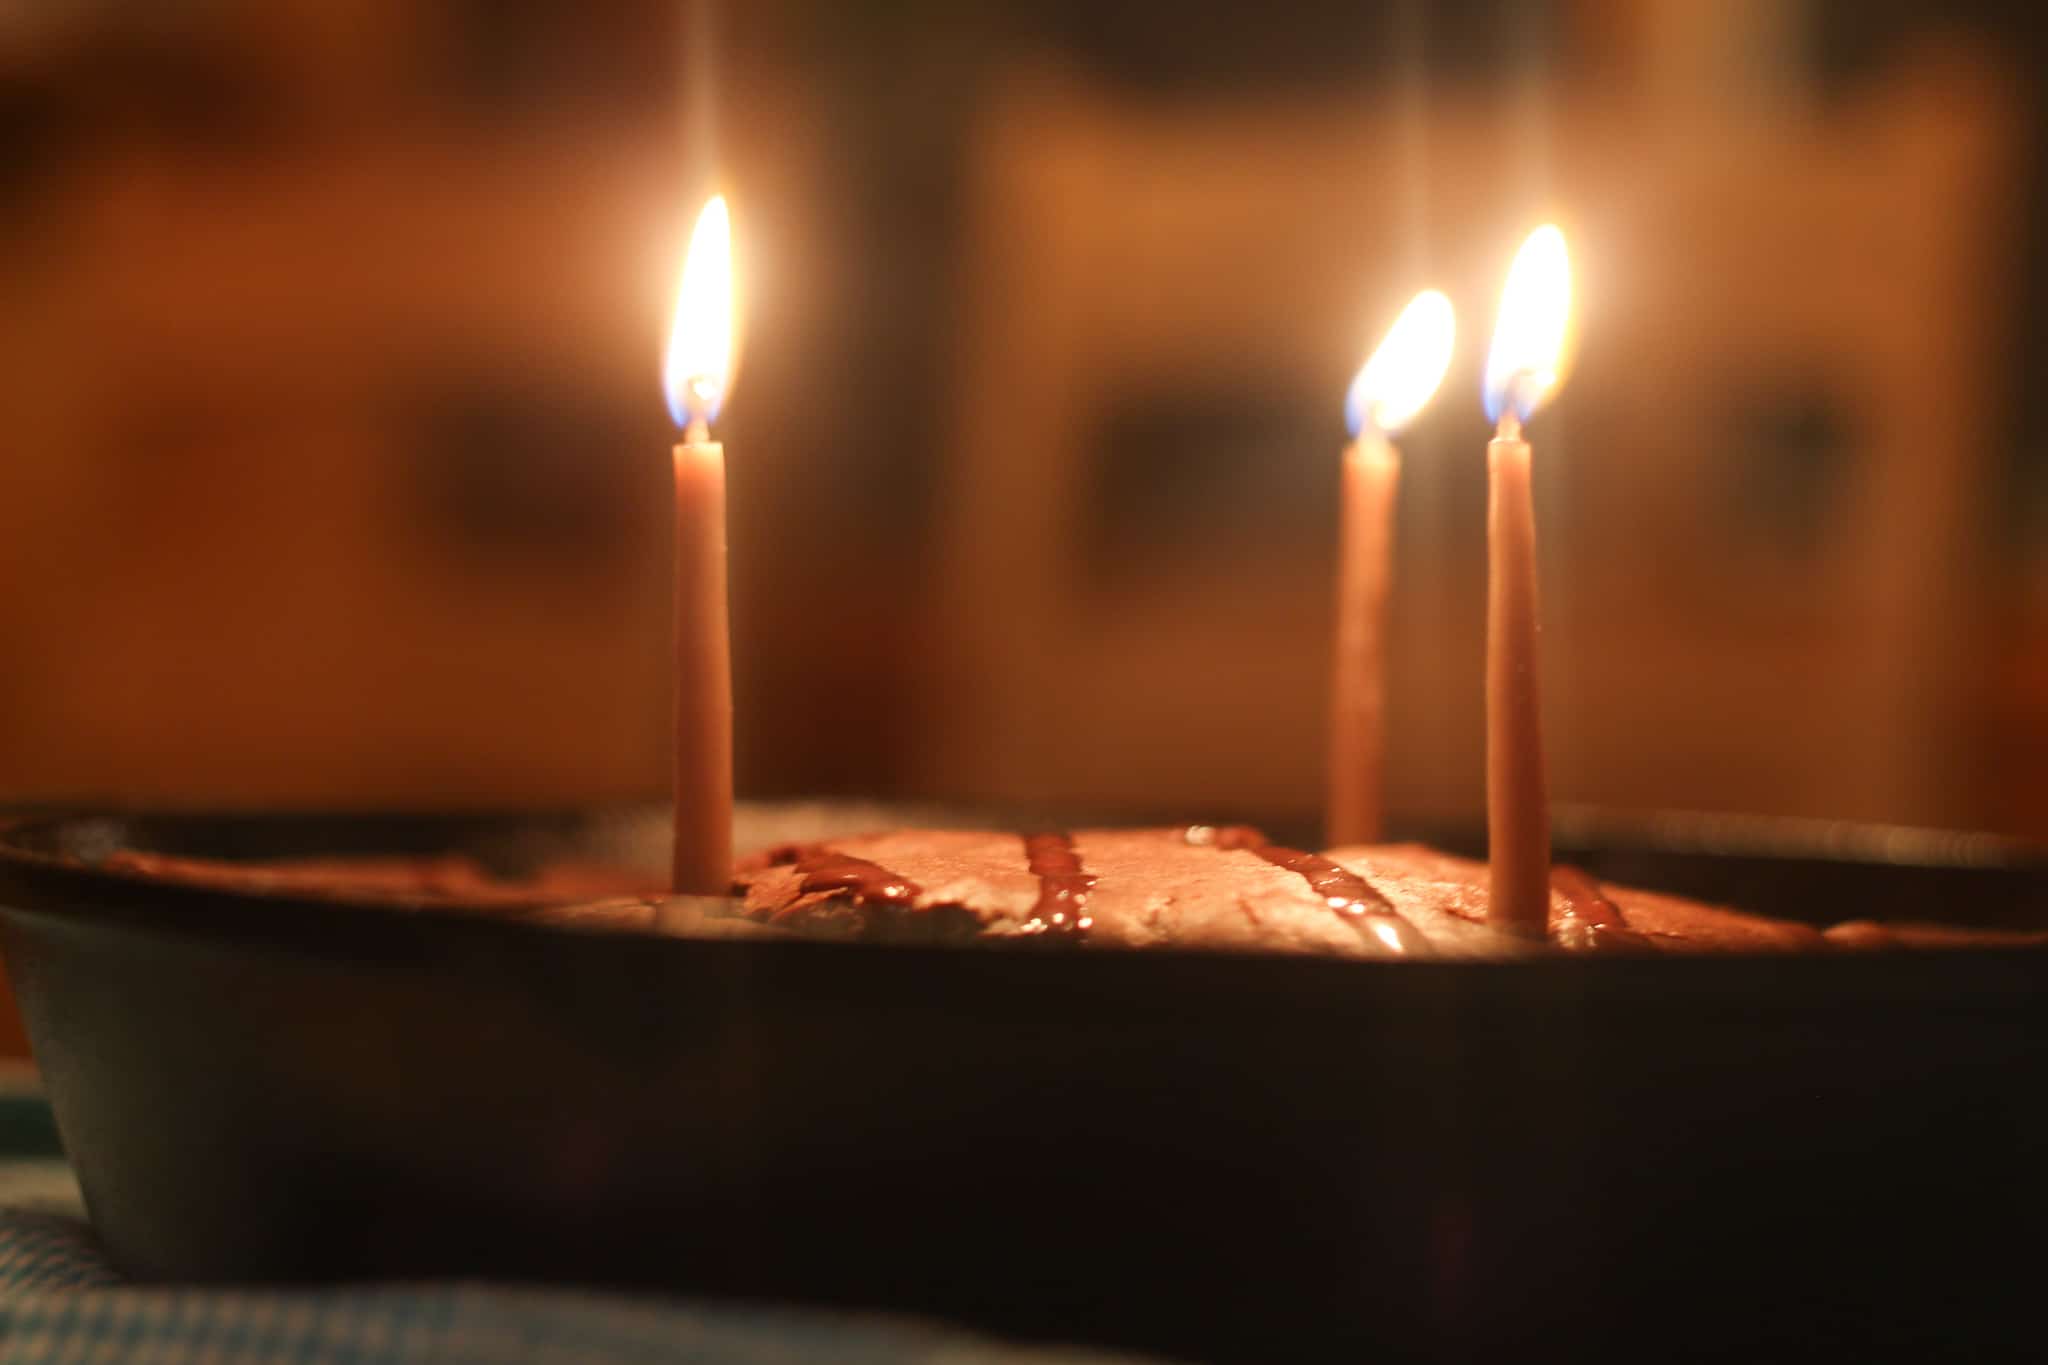 diy beeswax birthday candles in a chocolate cake